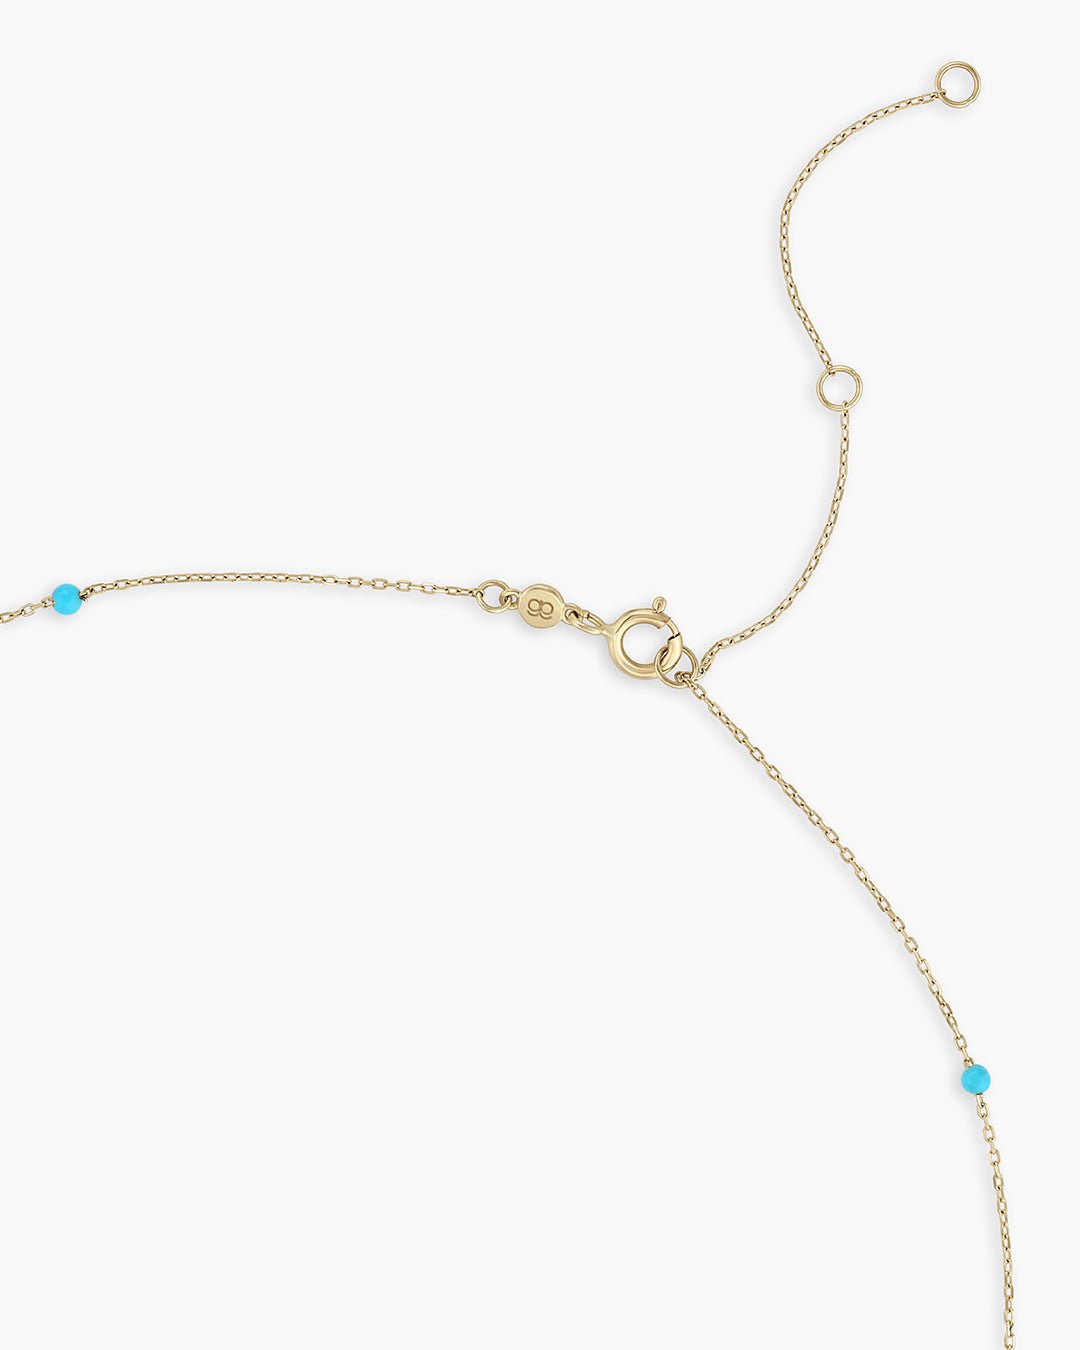 Turquoise Newport Necklace || option::14k Solid Gold